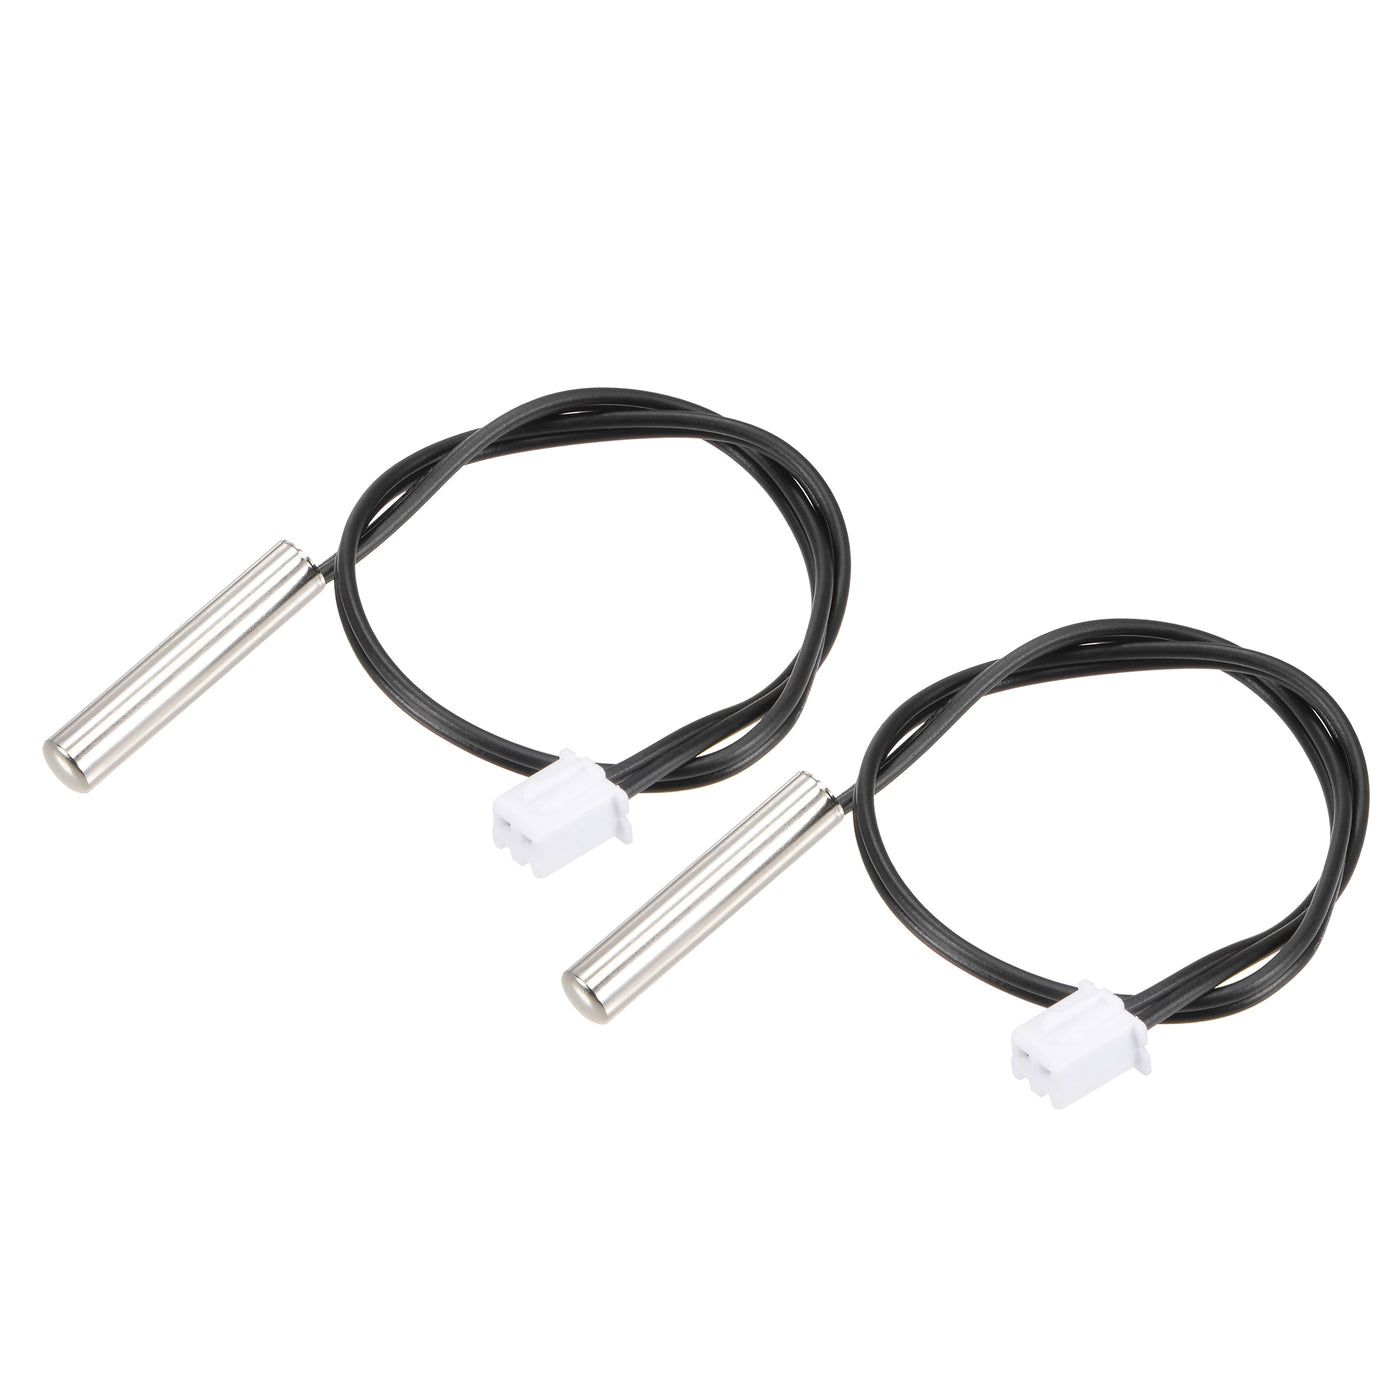 uxcell Uxcell 2pcs 10K Temperature Sensor Probe, Stainless Steel NTC Thermal Sensor Probe 20cm Digital Thermometer Extension Cable